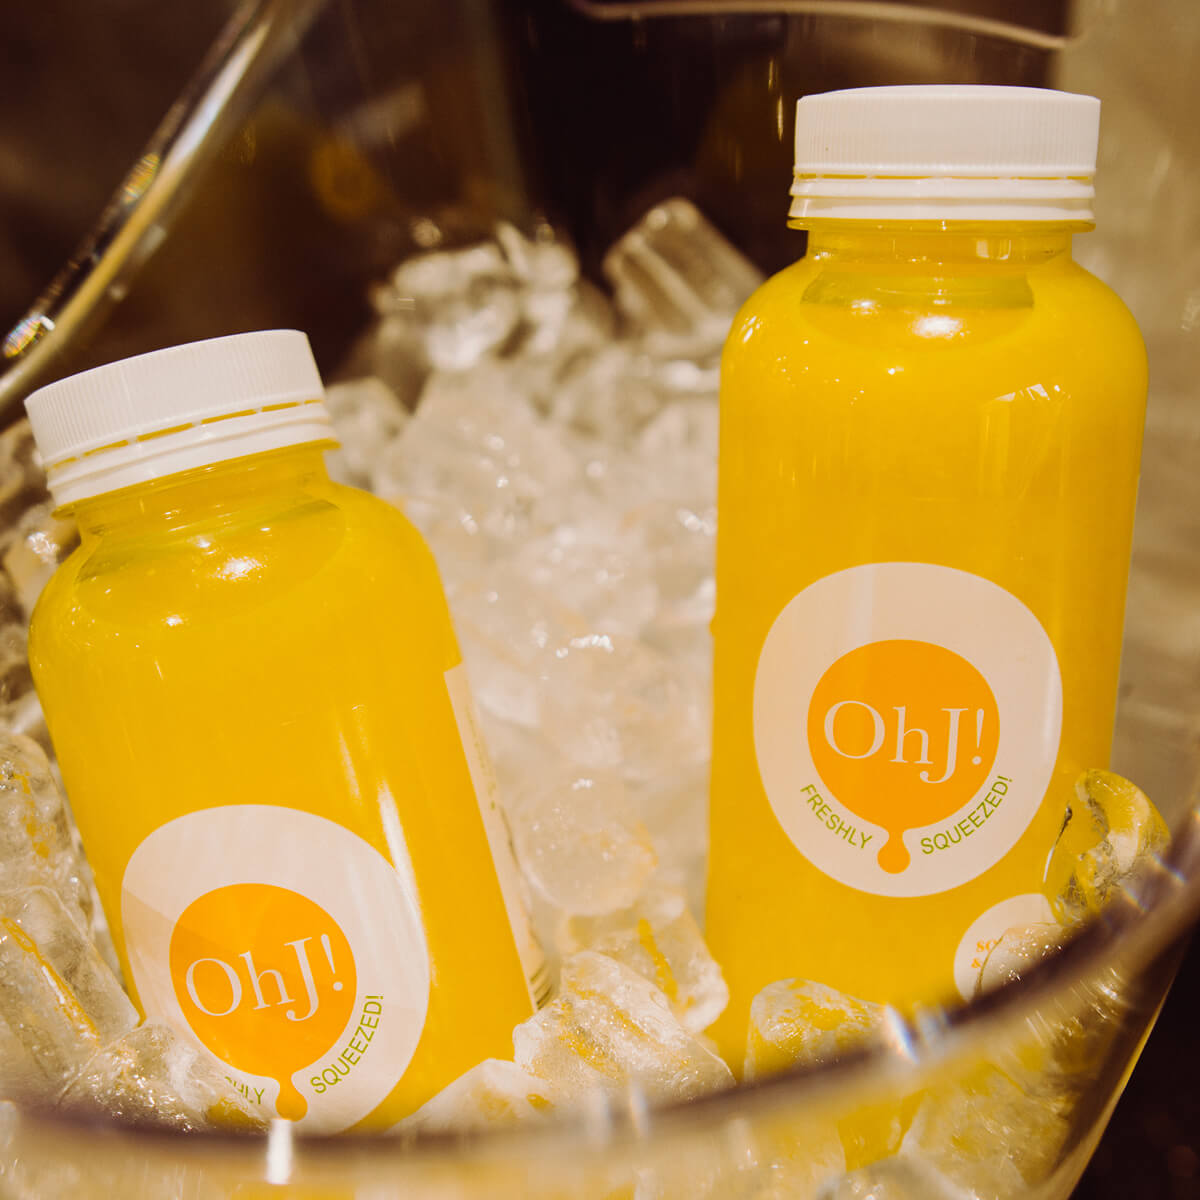 OhJ! - Enjoy a healthy orange juice when you stop for fuel